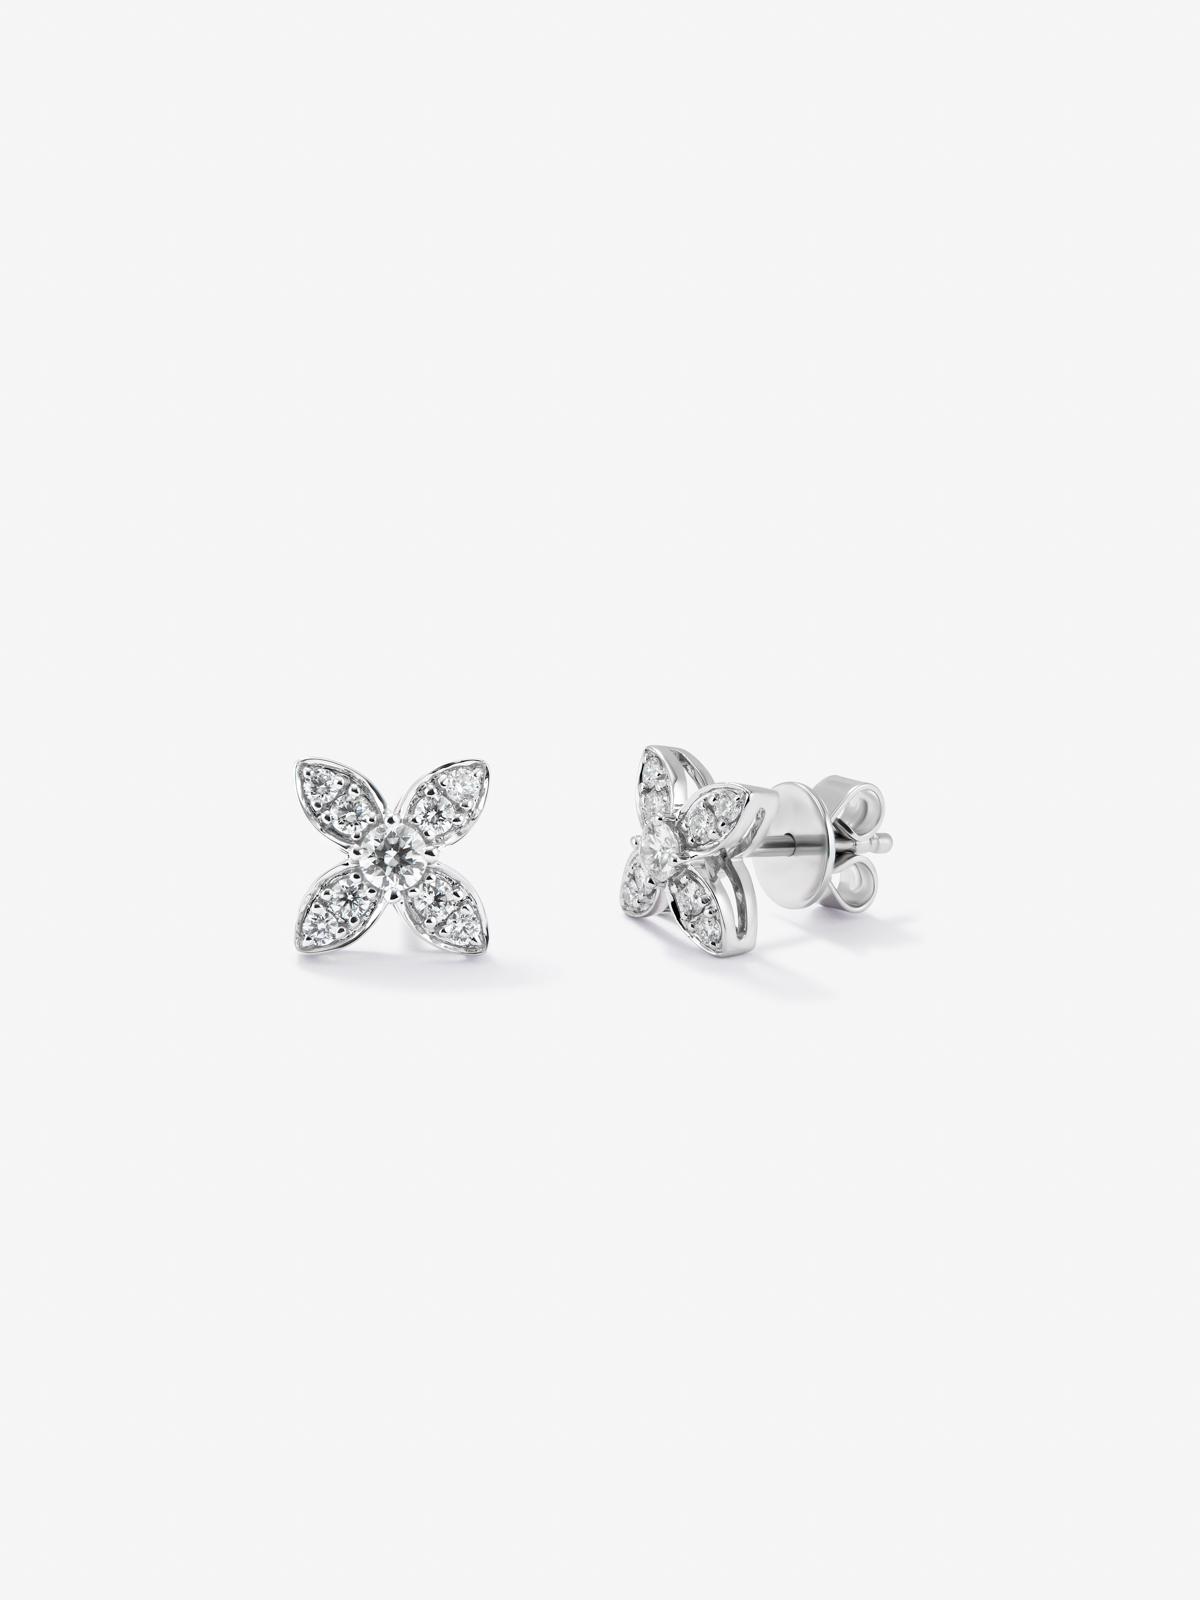 18K white gold earrings with white diamonds of 0.4 cts